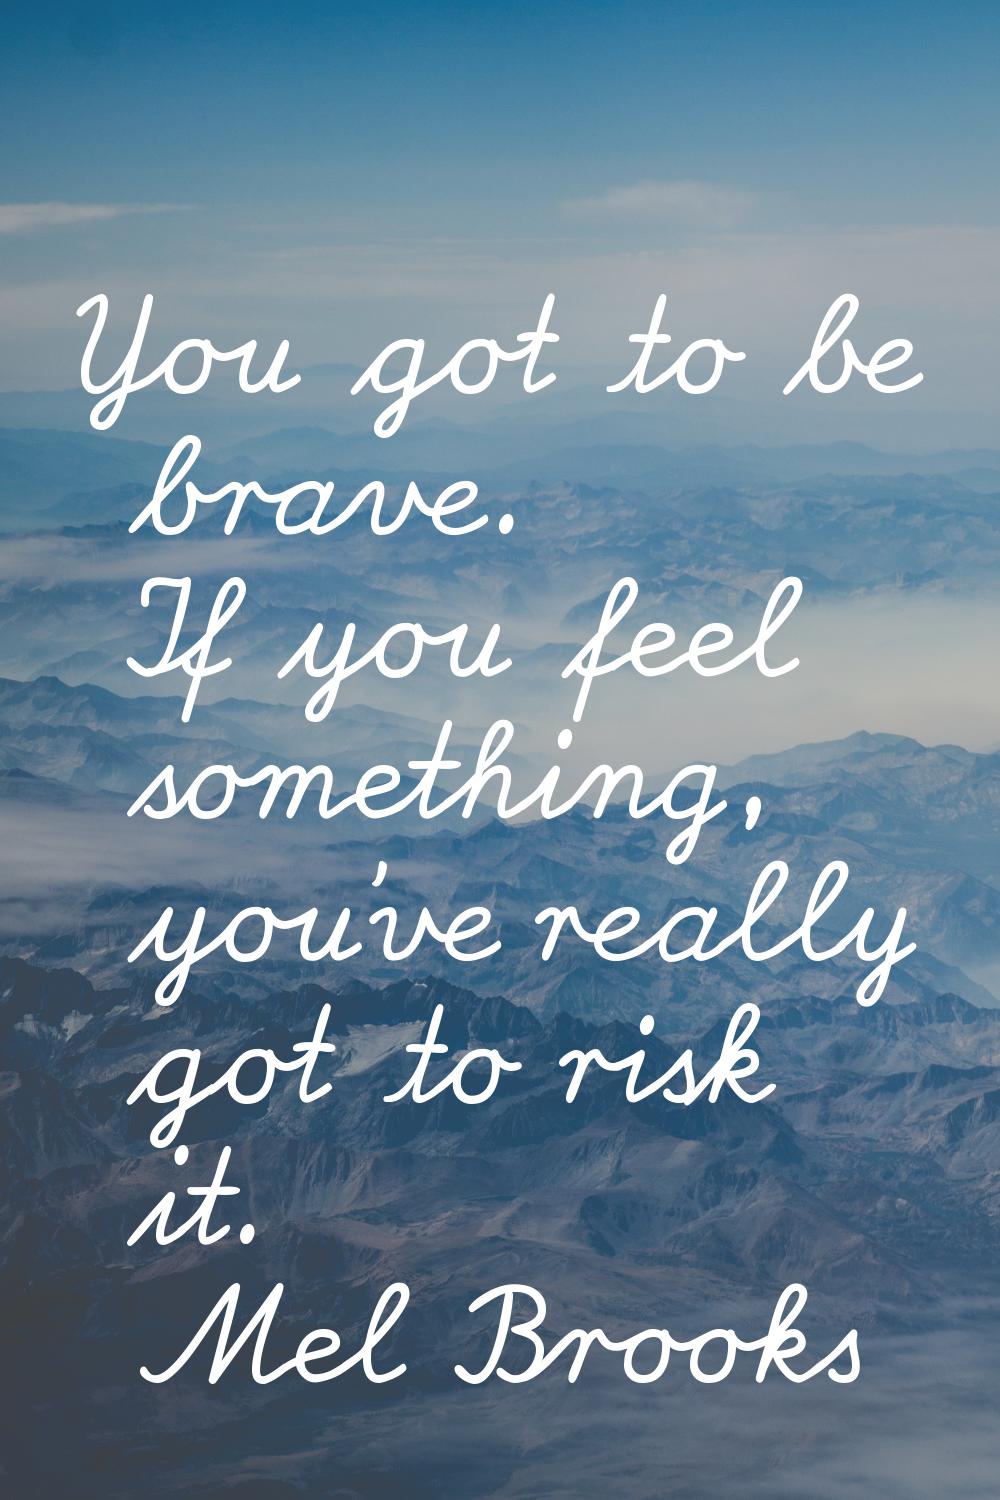 You got to be brave. If you feel something, you've really got to risk it.